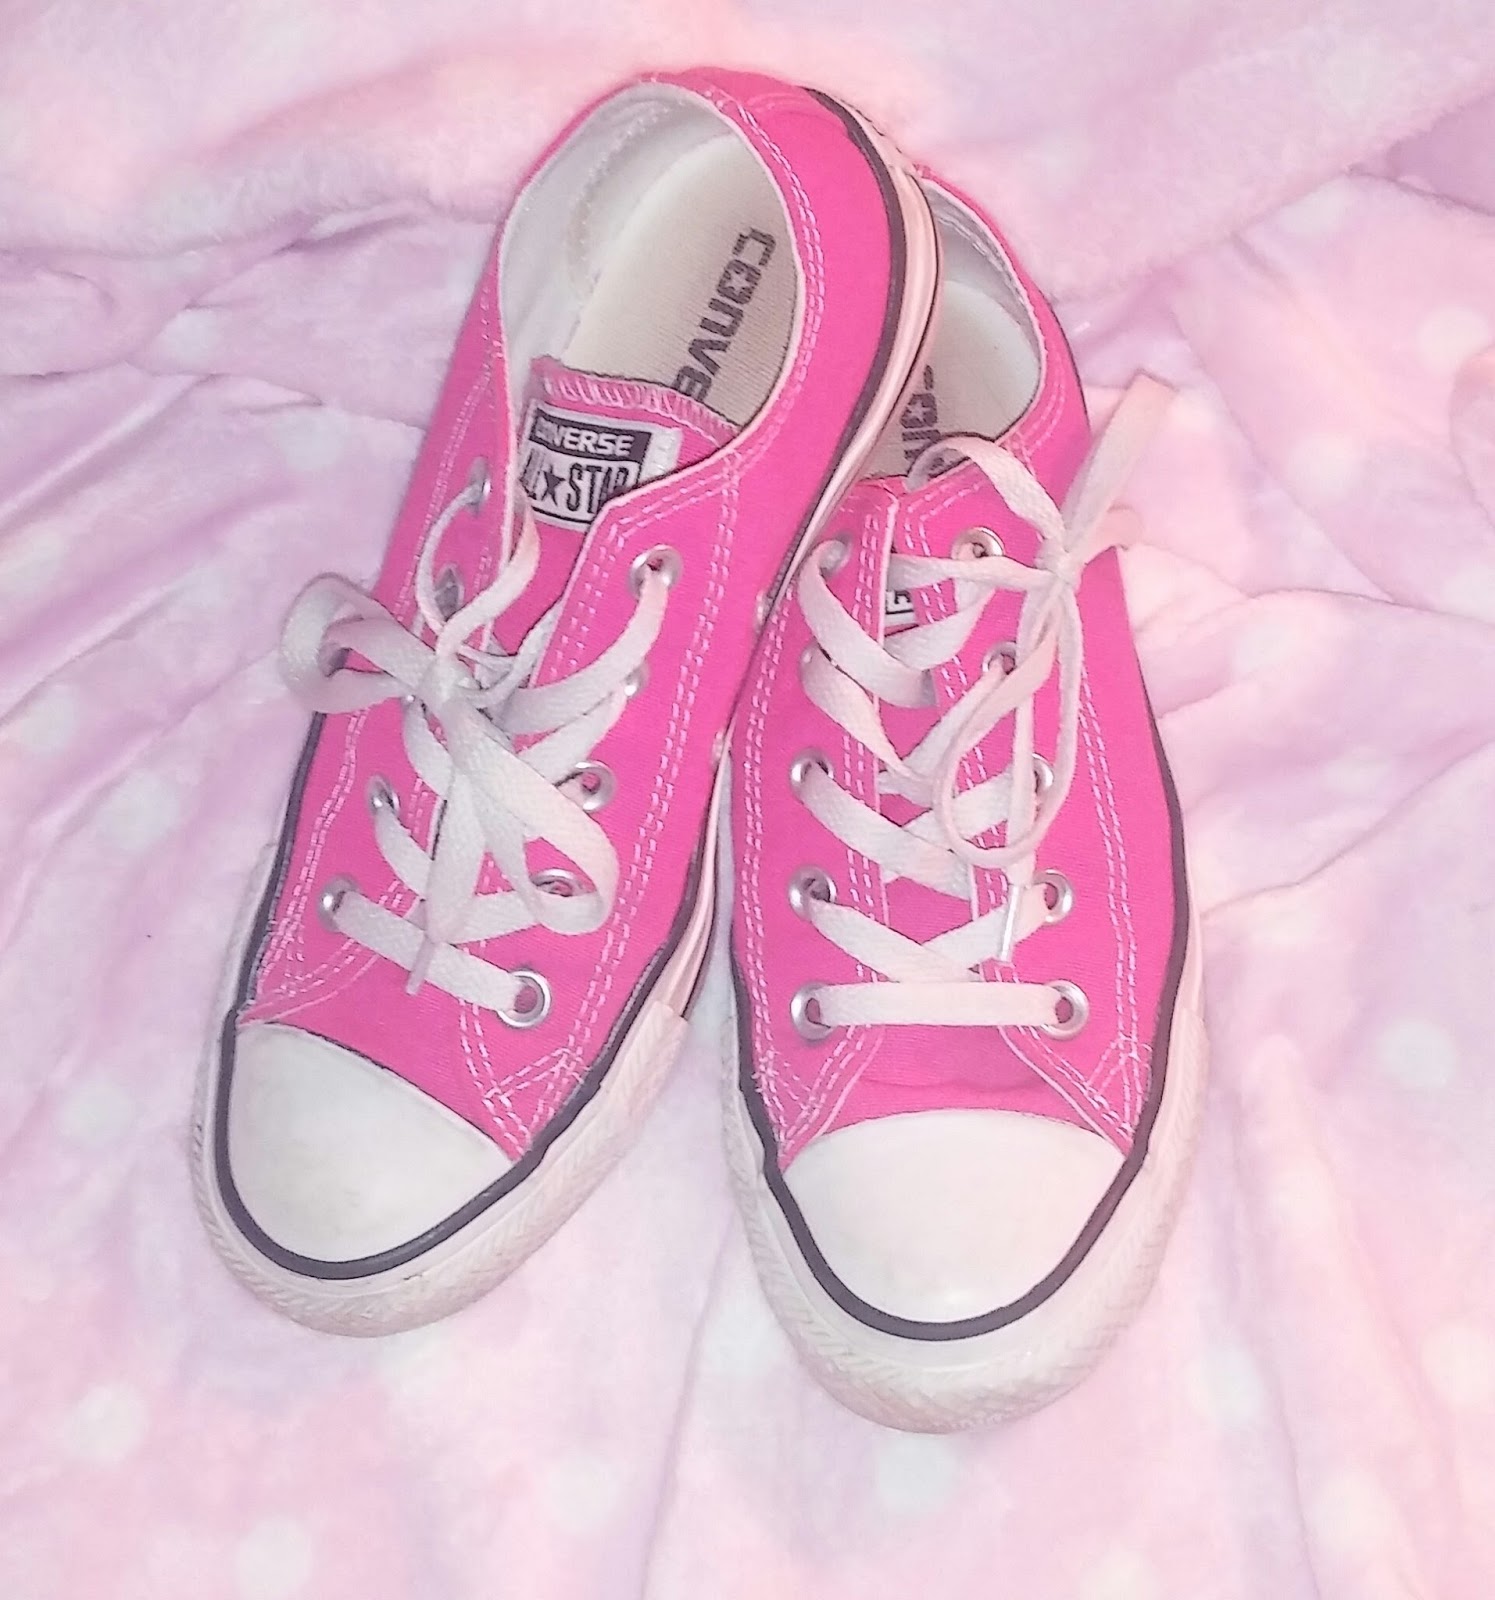 Converse of the Day: My Favorite Pair of Shoes!!!